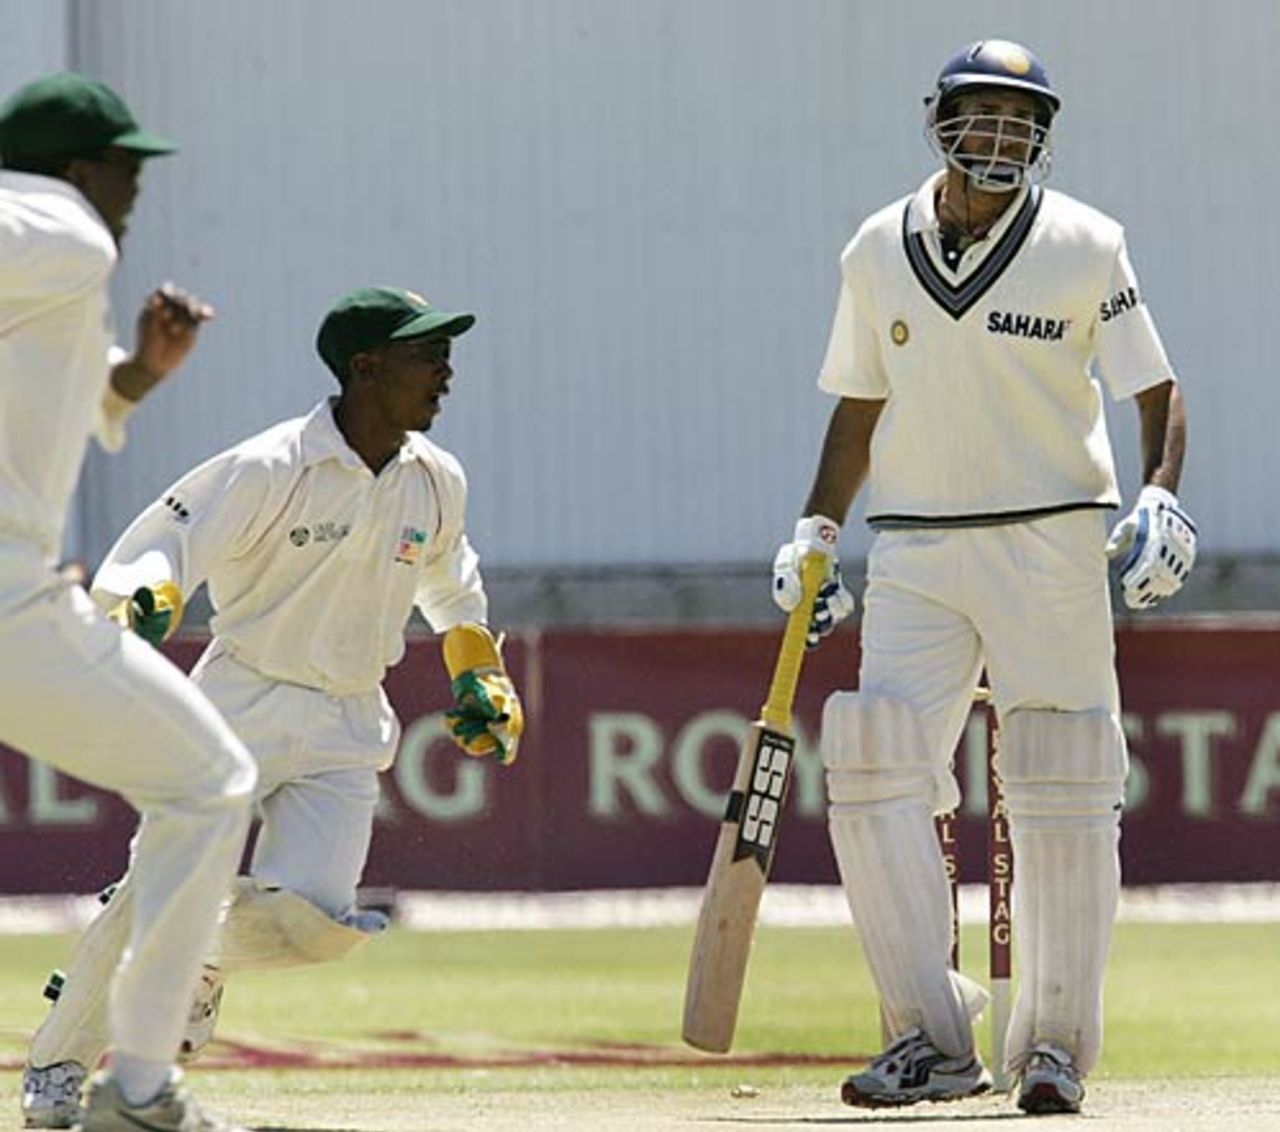 VVS Laxman was run out after playing a sublime innings of 140, Zimbabwe v India, 1st Test, Bulawayo, September 15, 2005